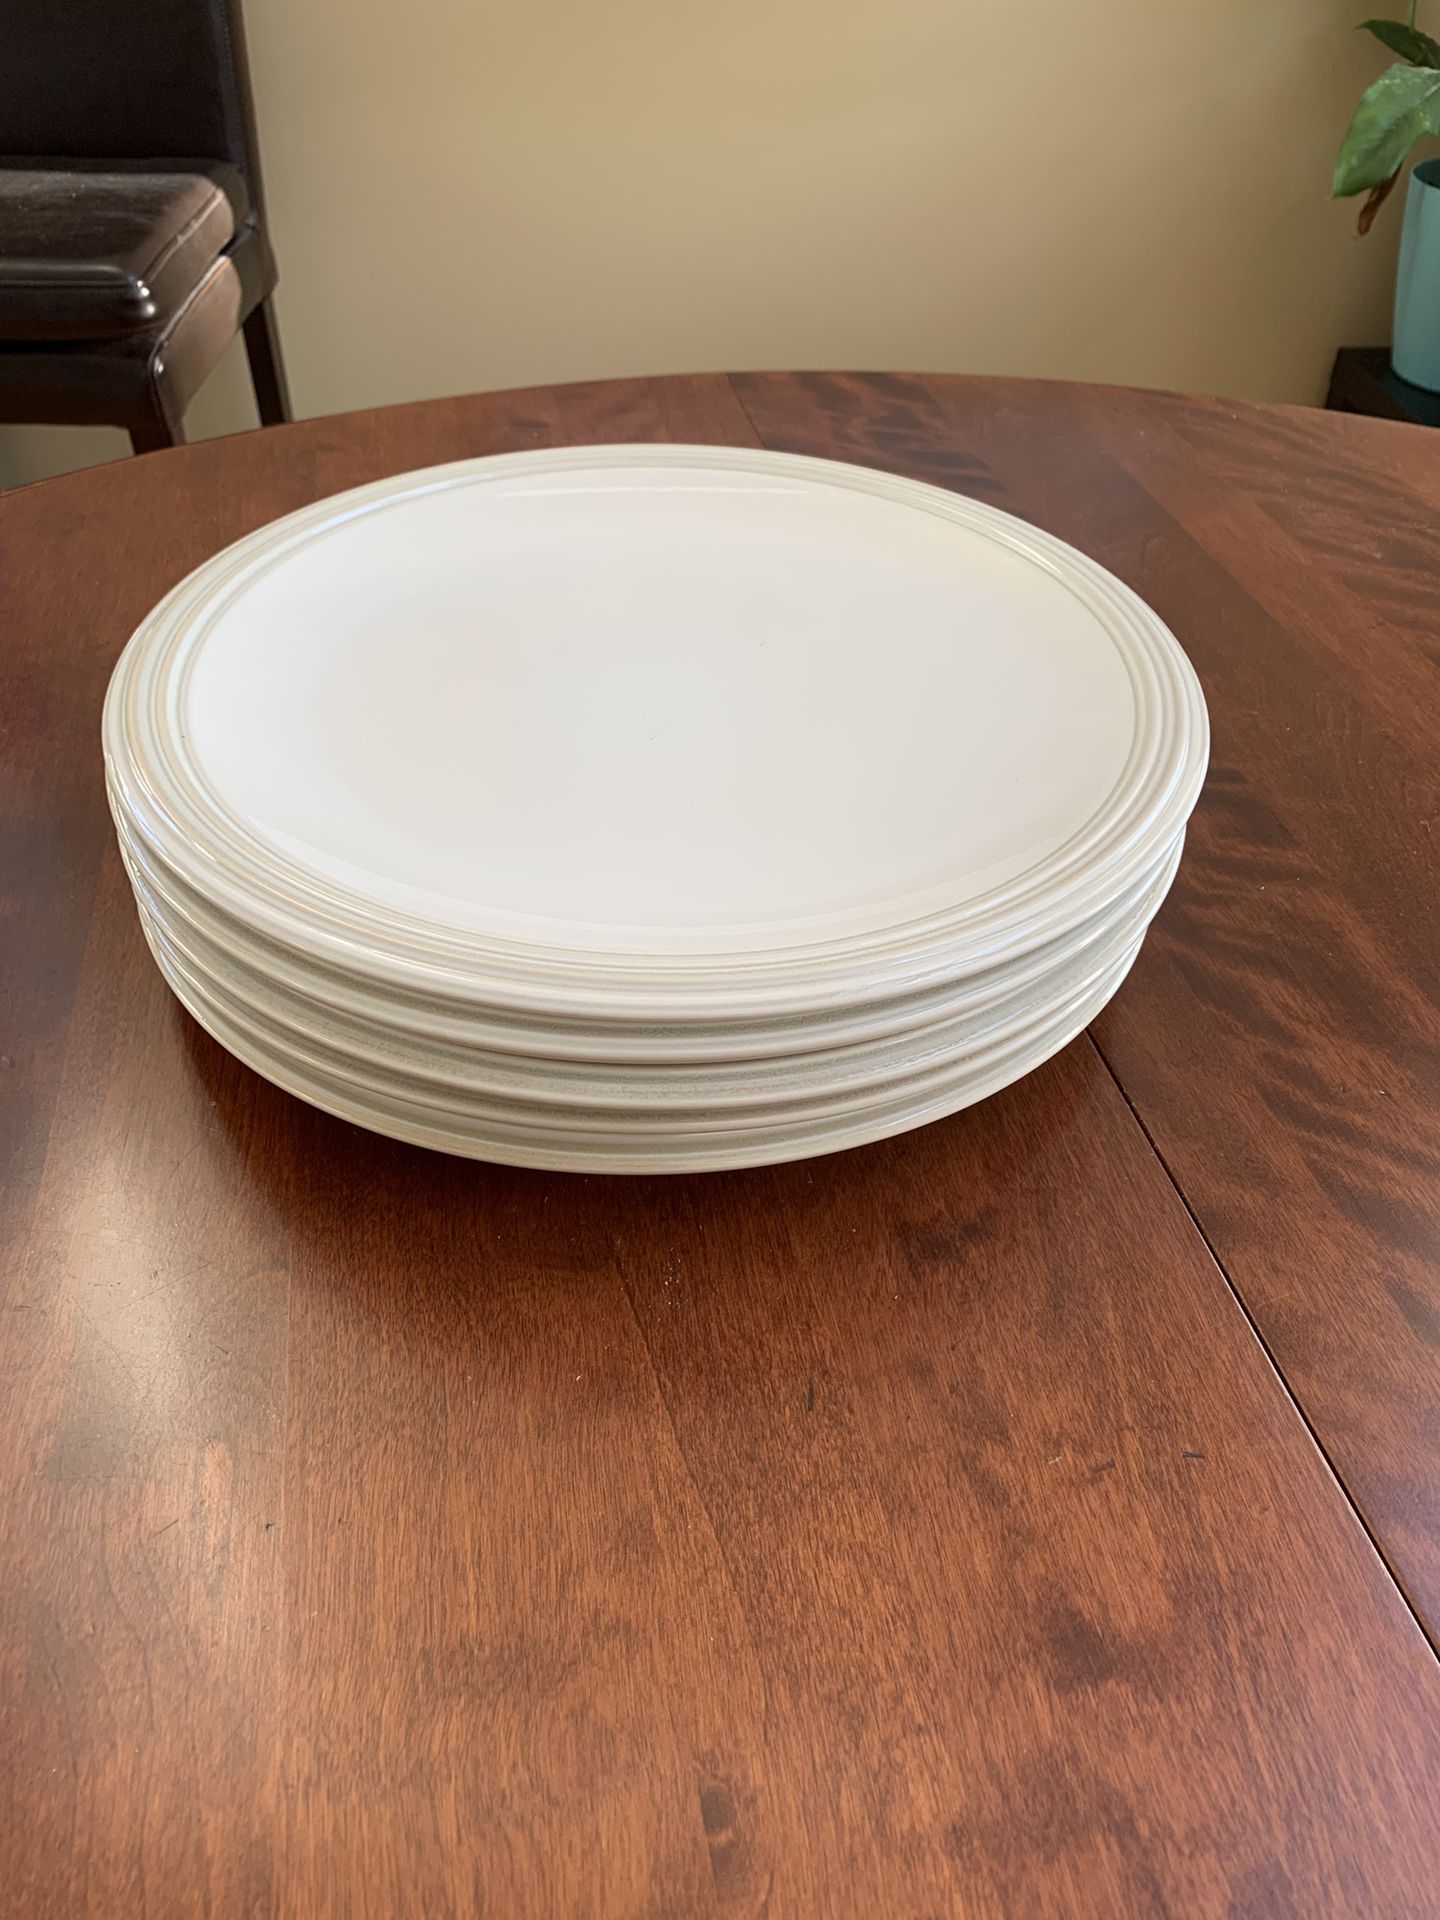 Pfaltzgraff Cappuccino Chop Plate - 13” Round Platter. New. Never used. Non smoking.